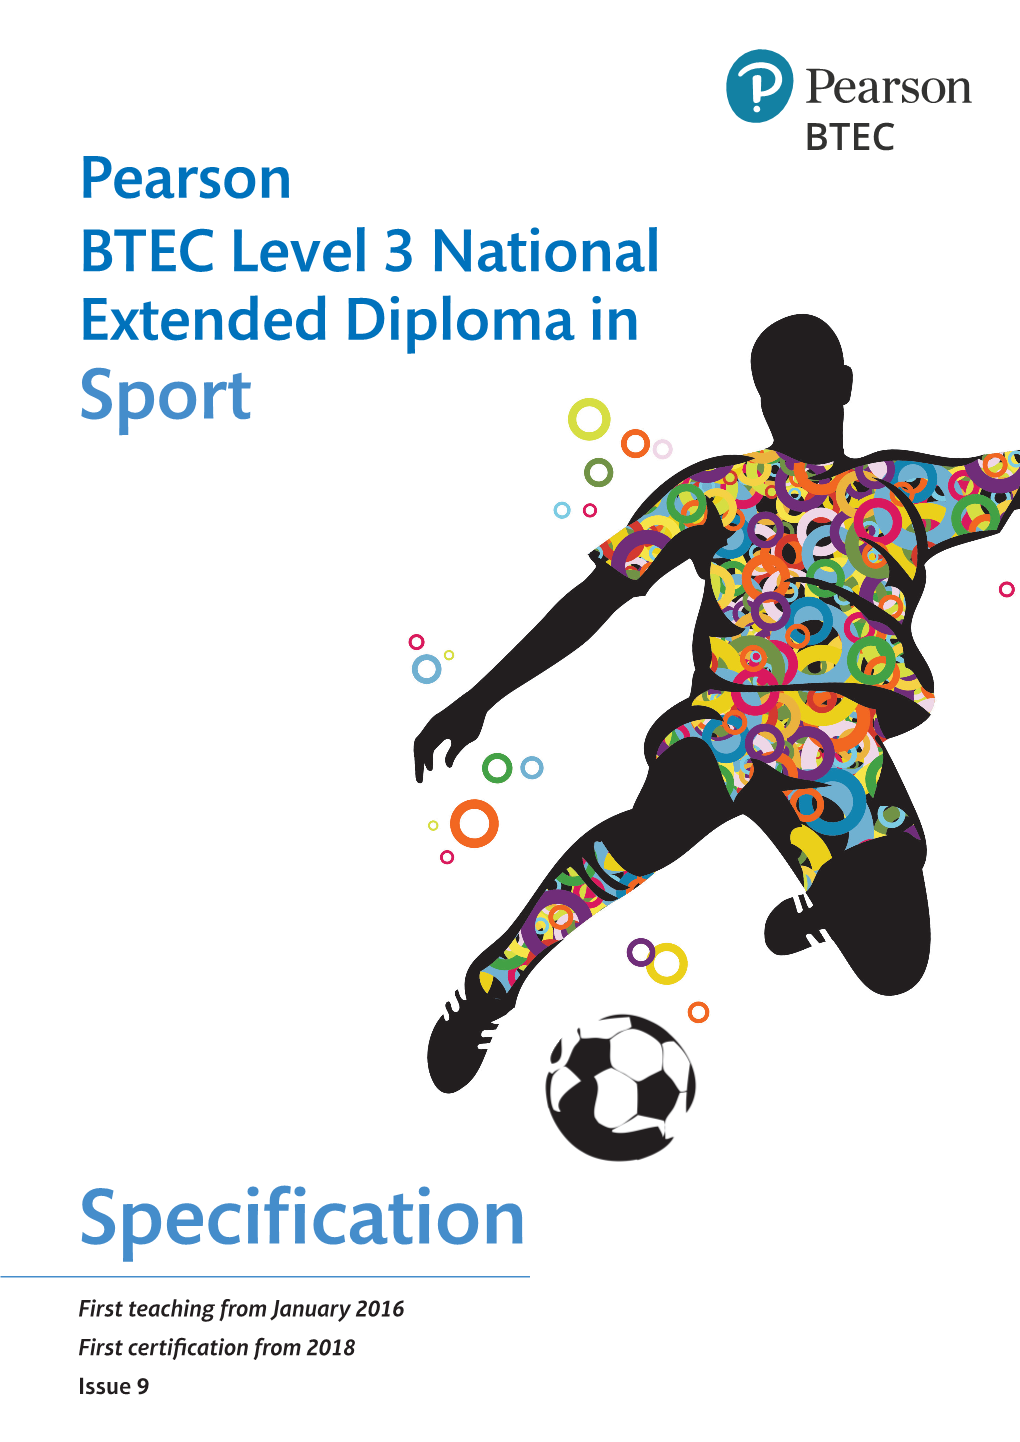 Pearson BTEC Level 3 National Extended Diploma in Sport